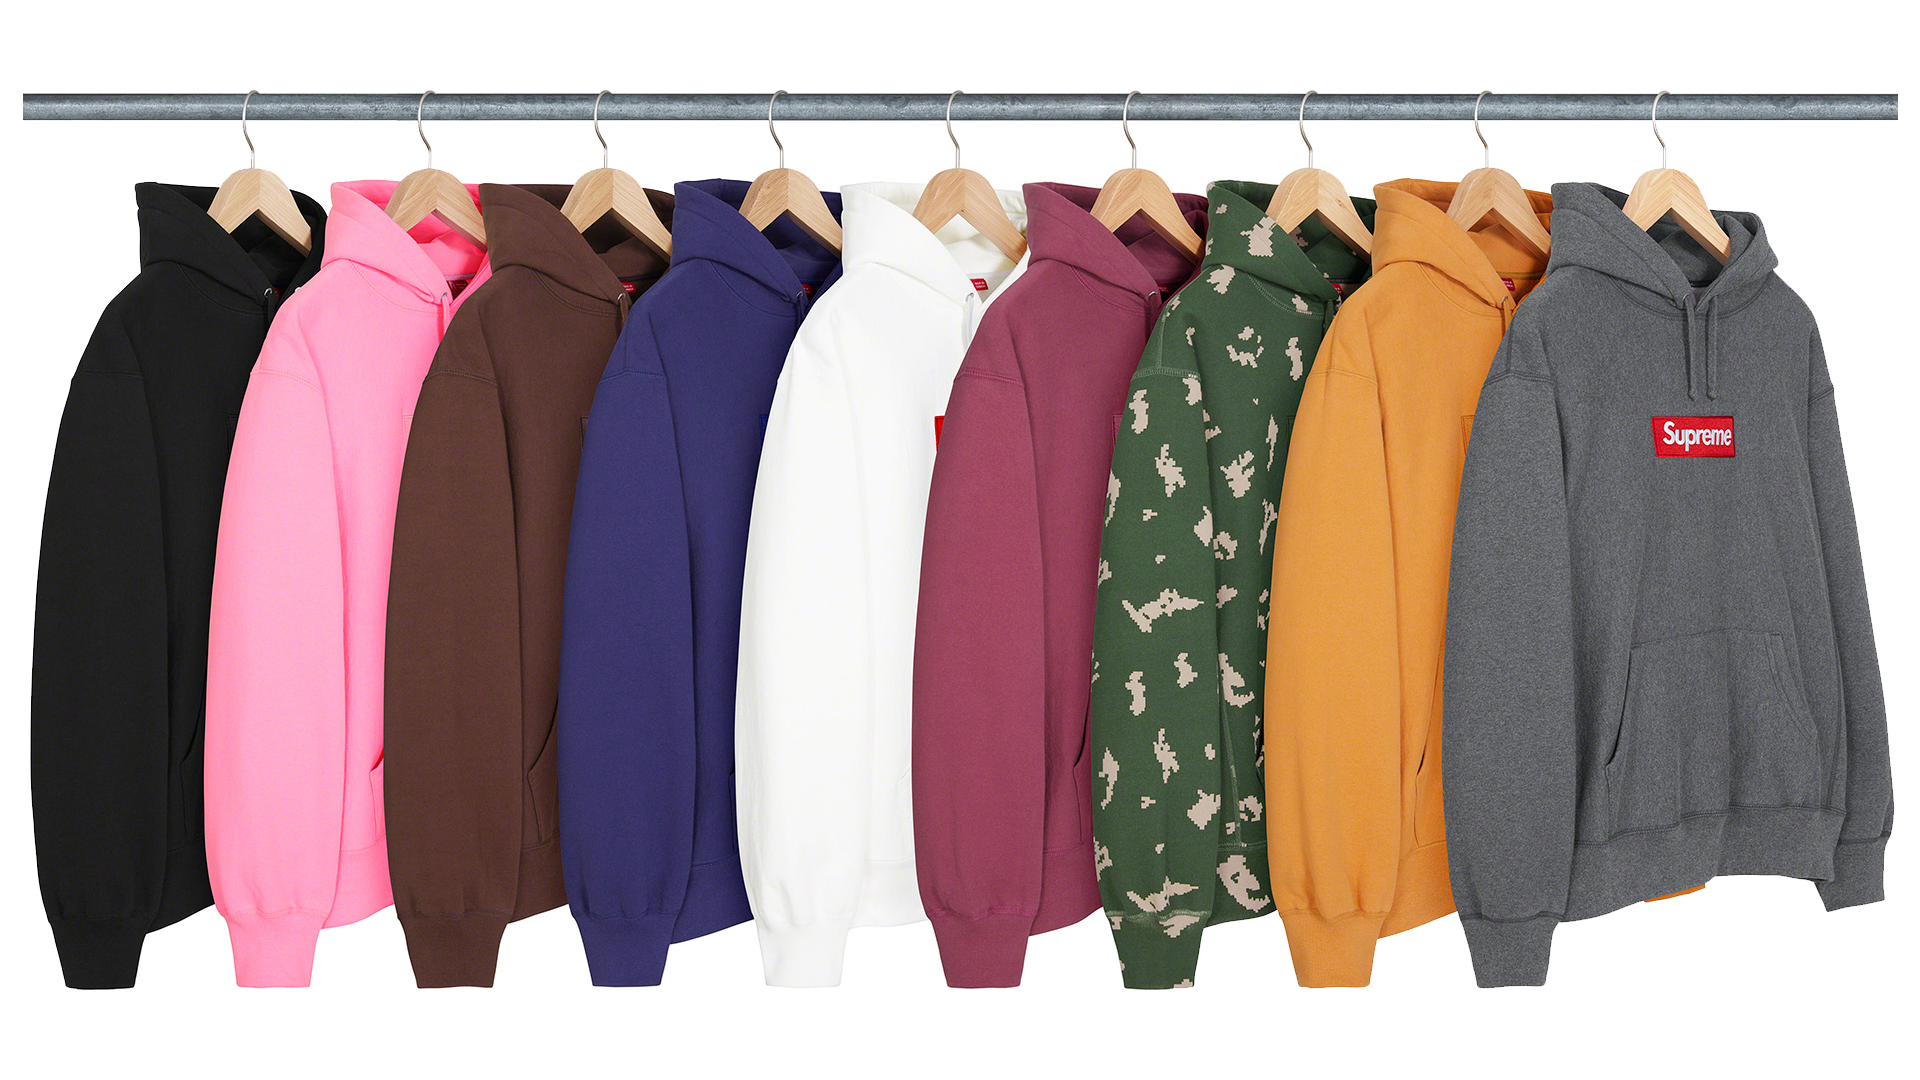 Supreme Box Logo Sweatshirts Expected This Week - SLN Official